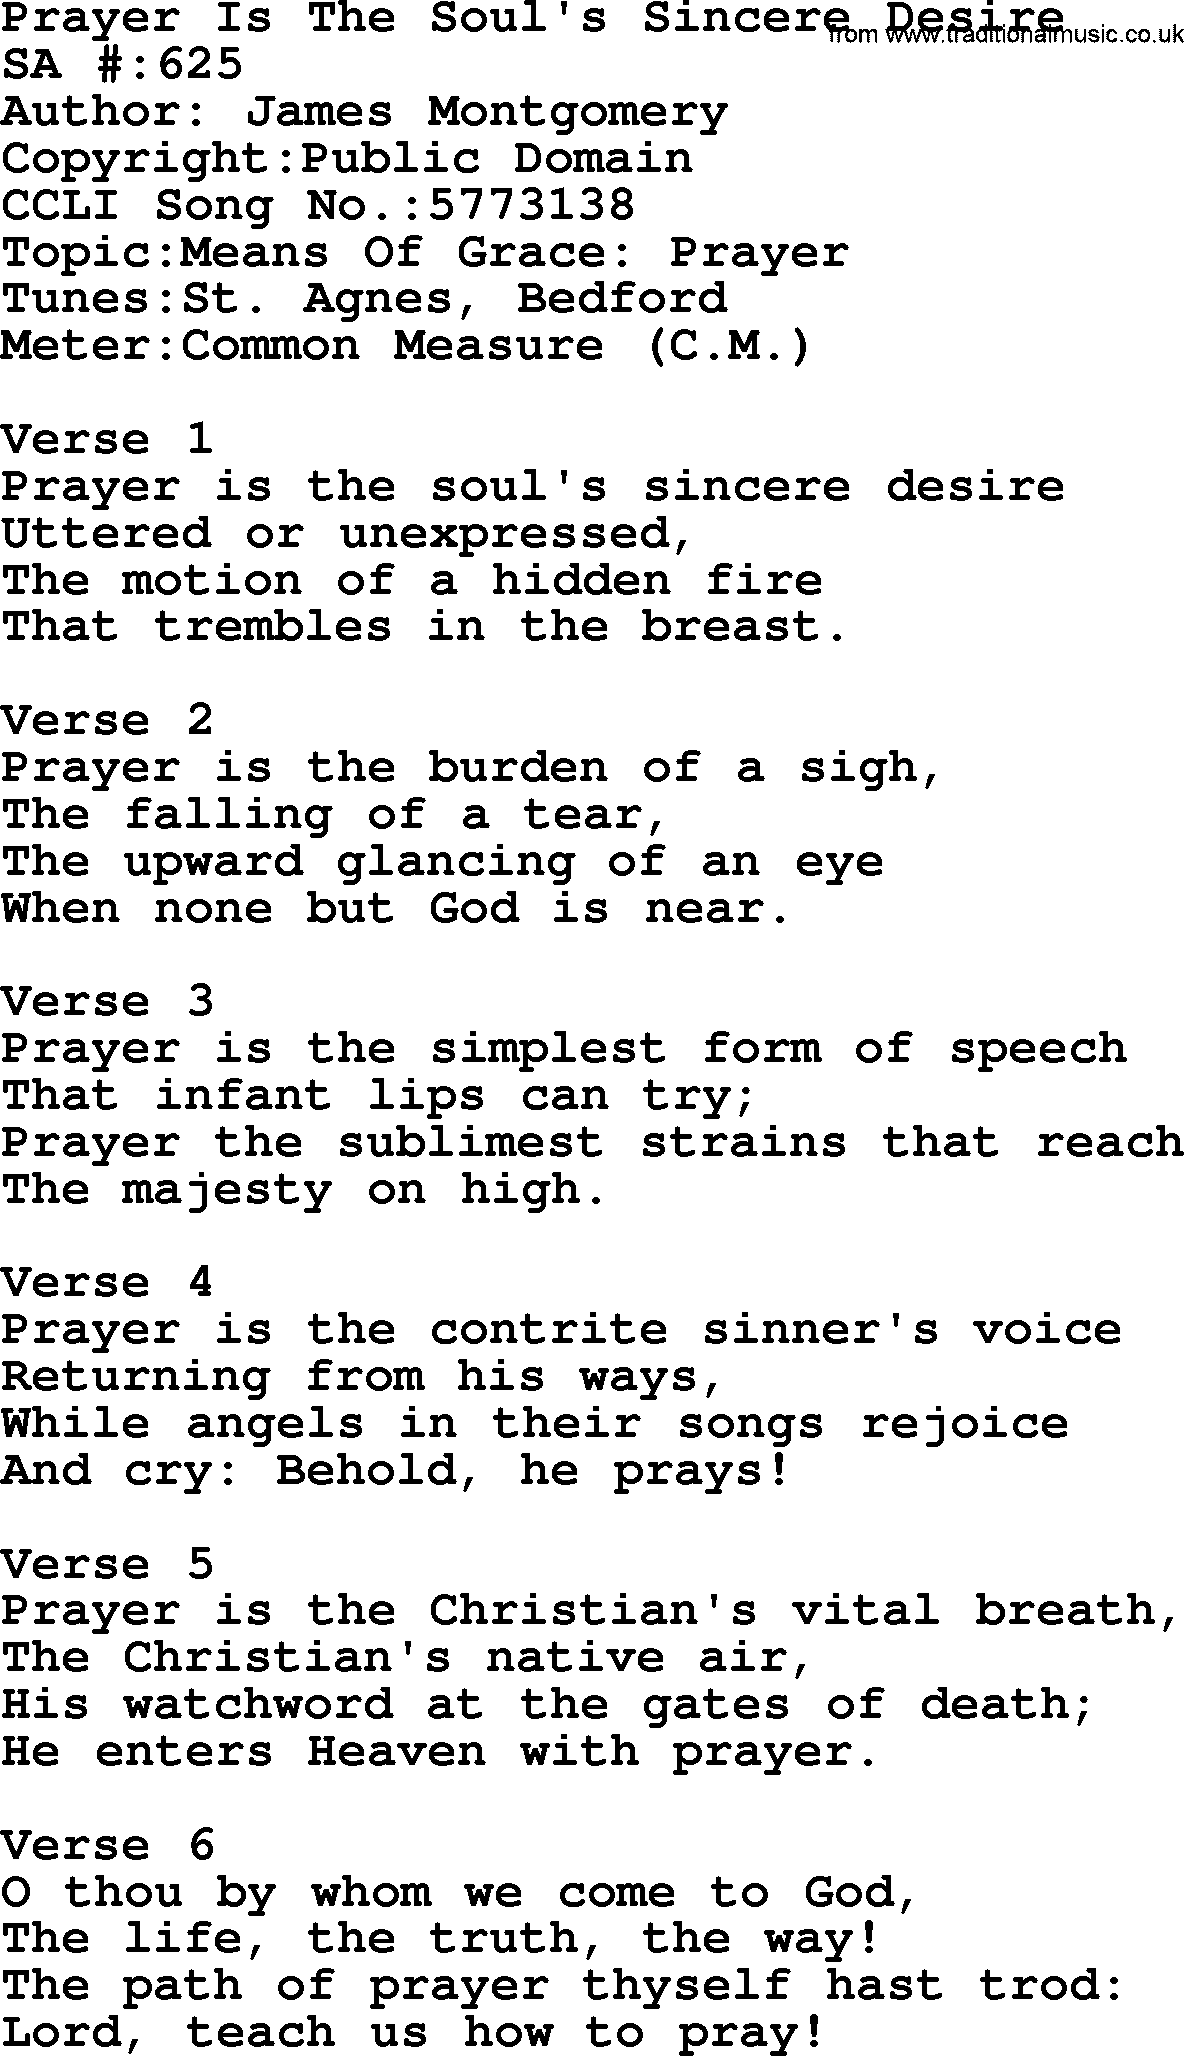 Salvation Army Hymnal, title: Prayer Is The Soul's Sincere Desire, with lyrics and PDF,